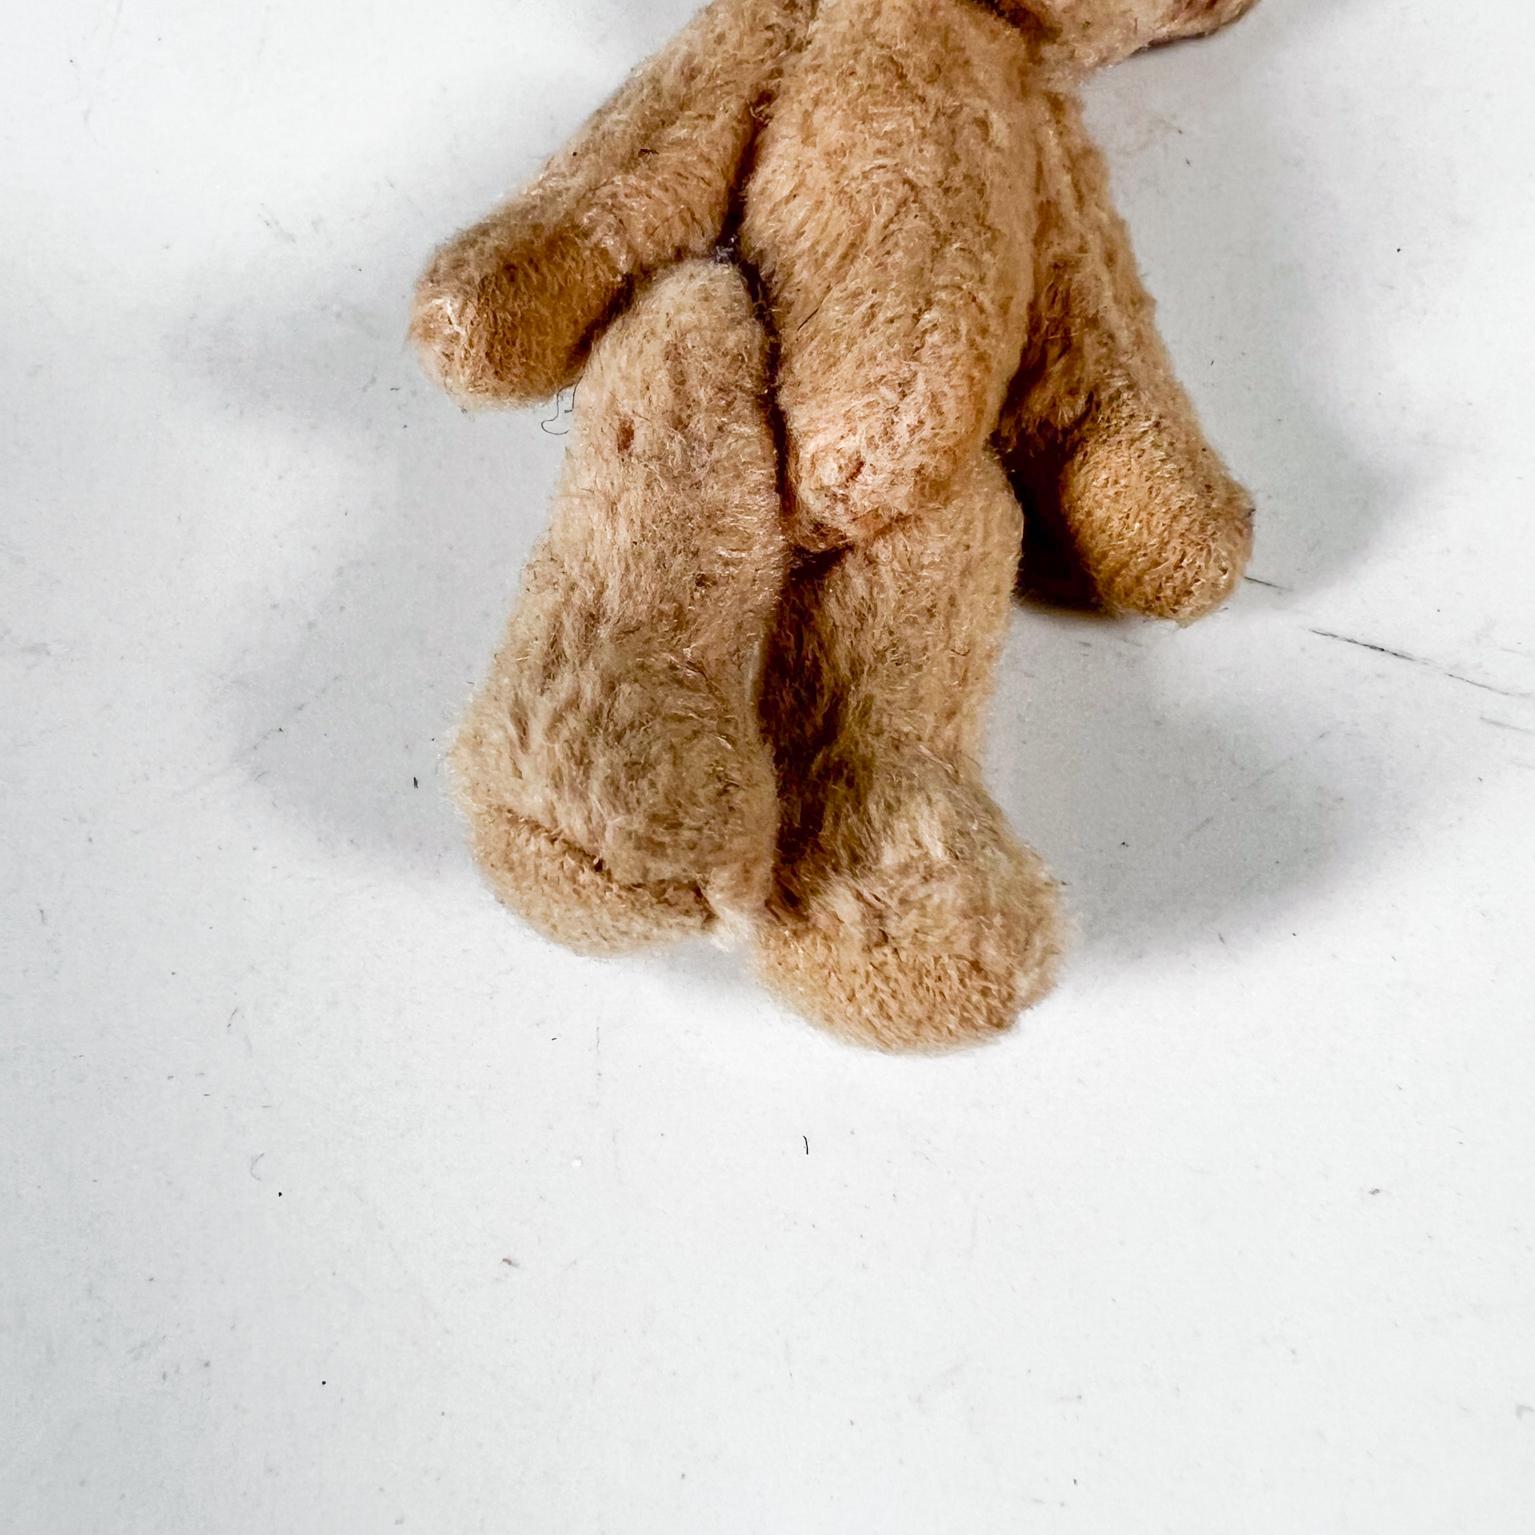 Mid 20th Century Tiny Baby Teddy Bear Soft Huggable Vintage In Good Condition For Sale In Chula Vista, CA